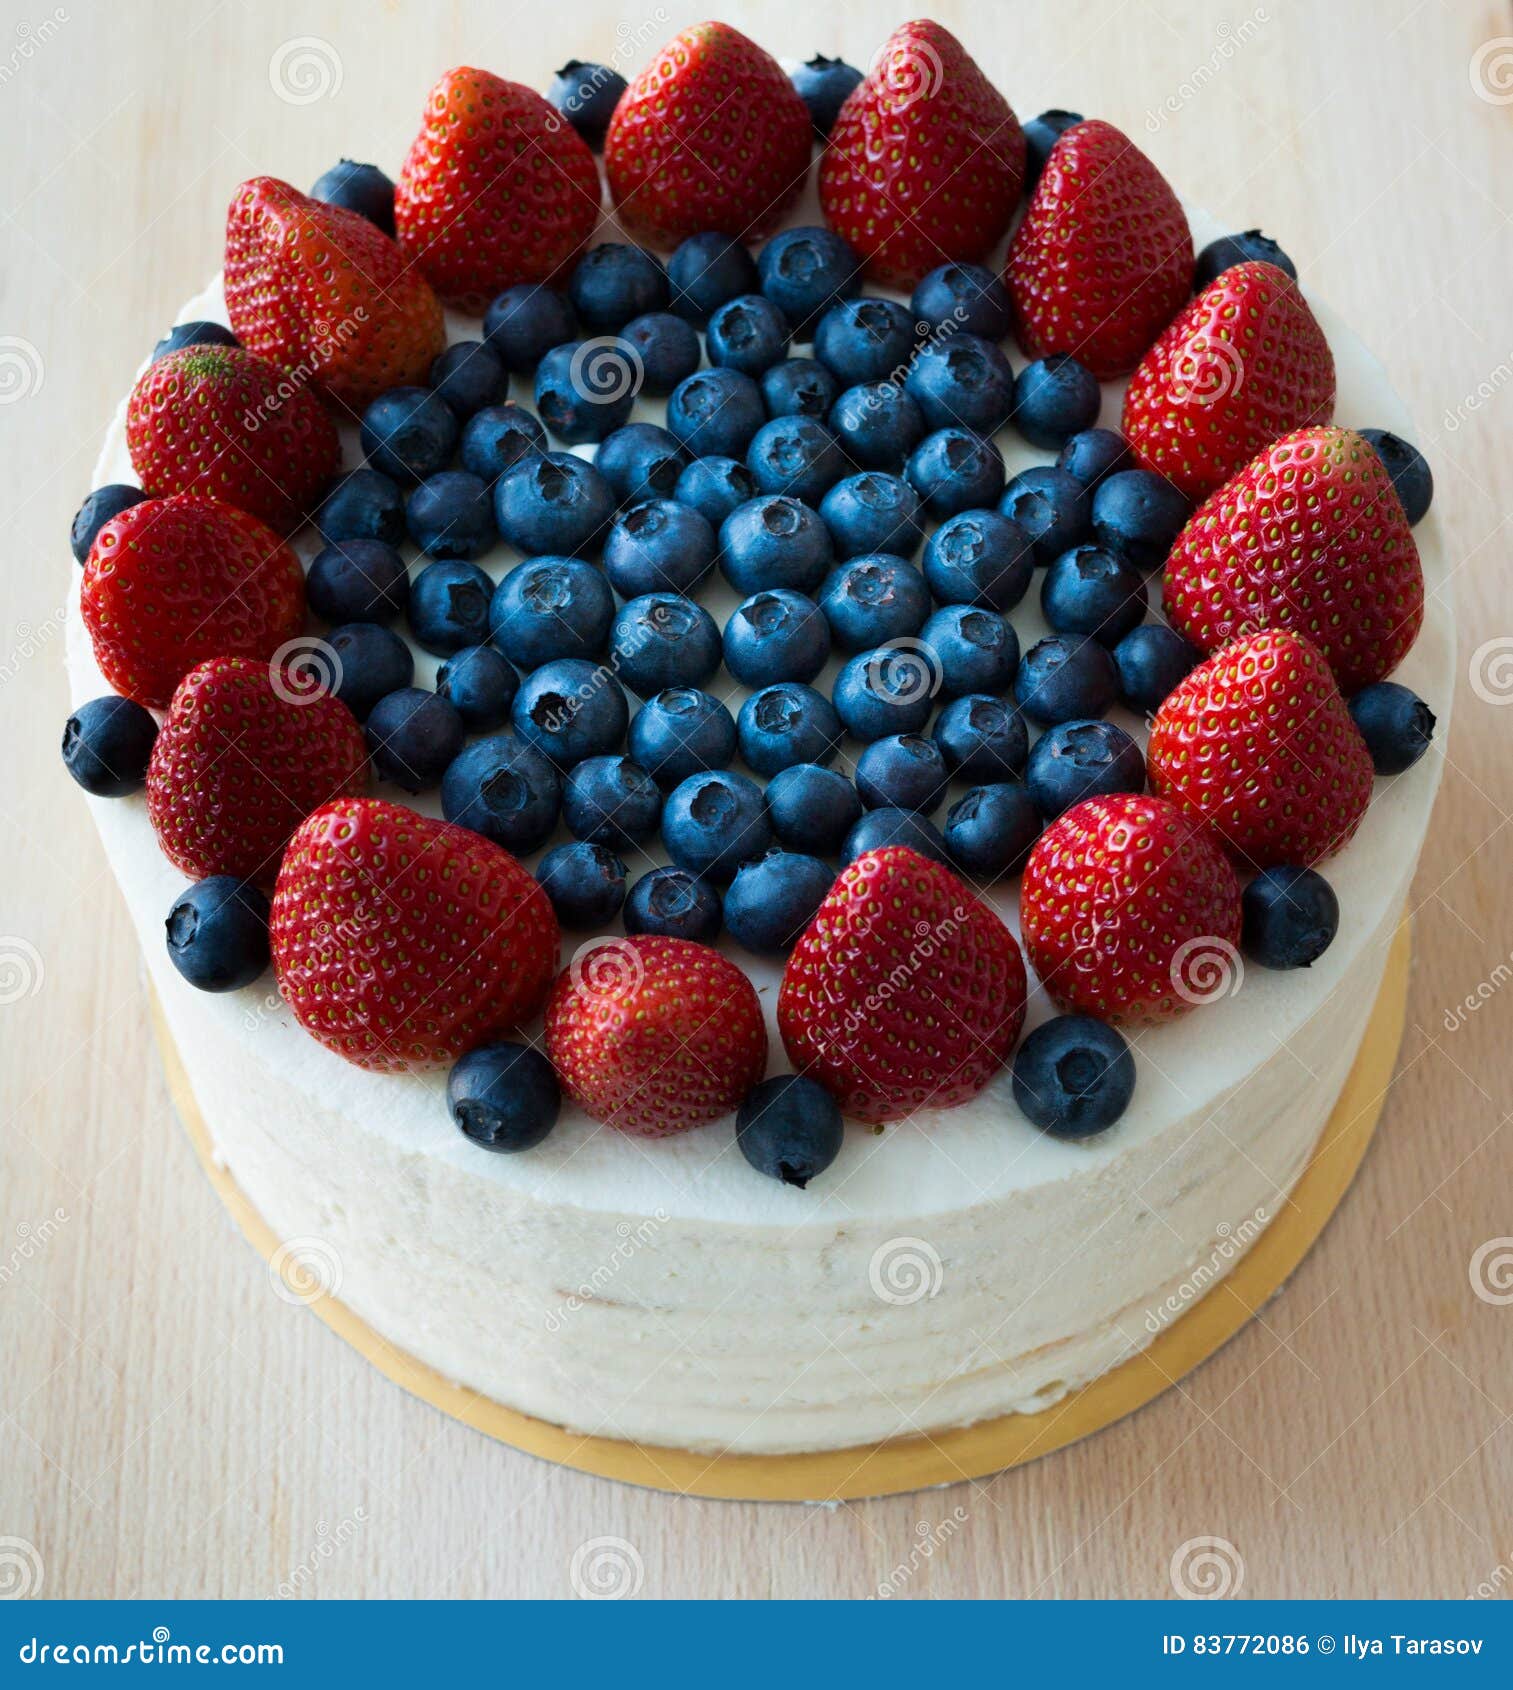 Cake Handmade, Decorated with Blueberries and Strawberries. Stock Photo ...